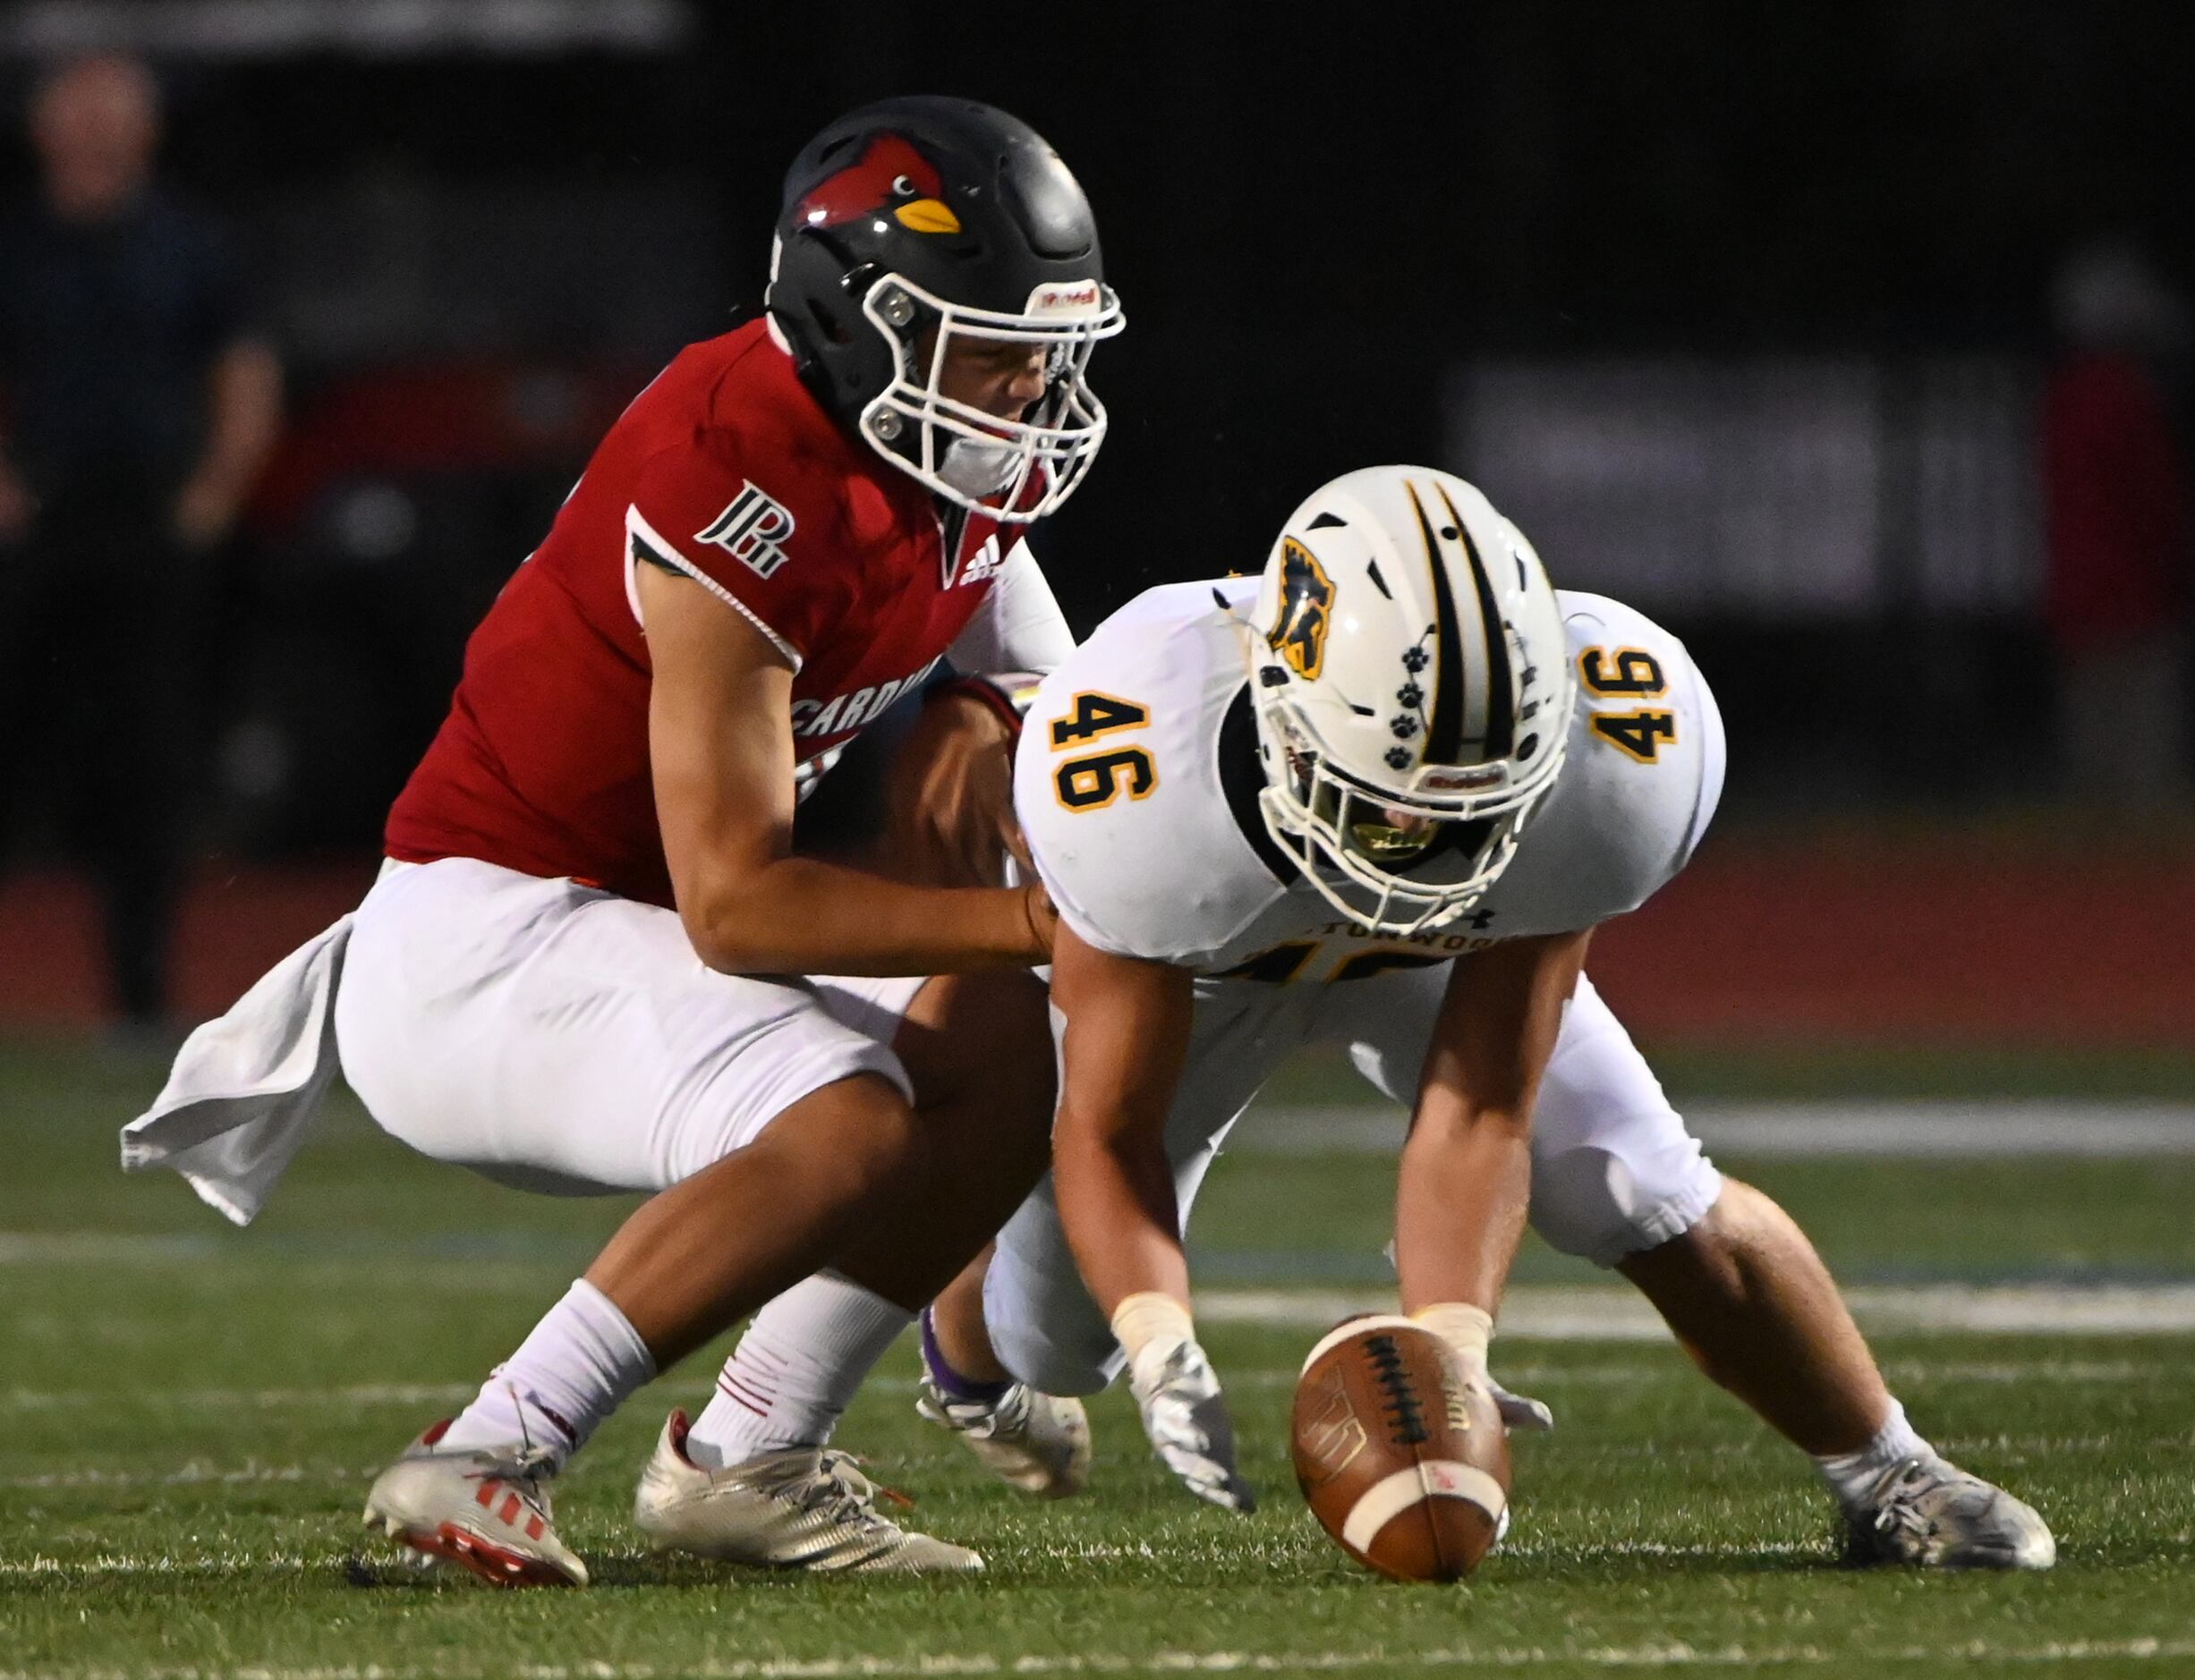 Prestonwood's Hudson Lunsford (46) recovers a fumble in front of John Paul II’s Jacob...